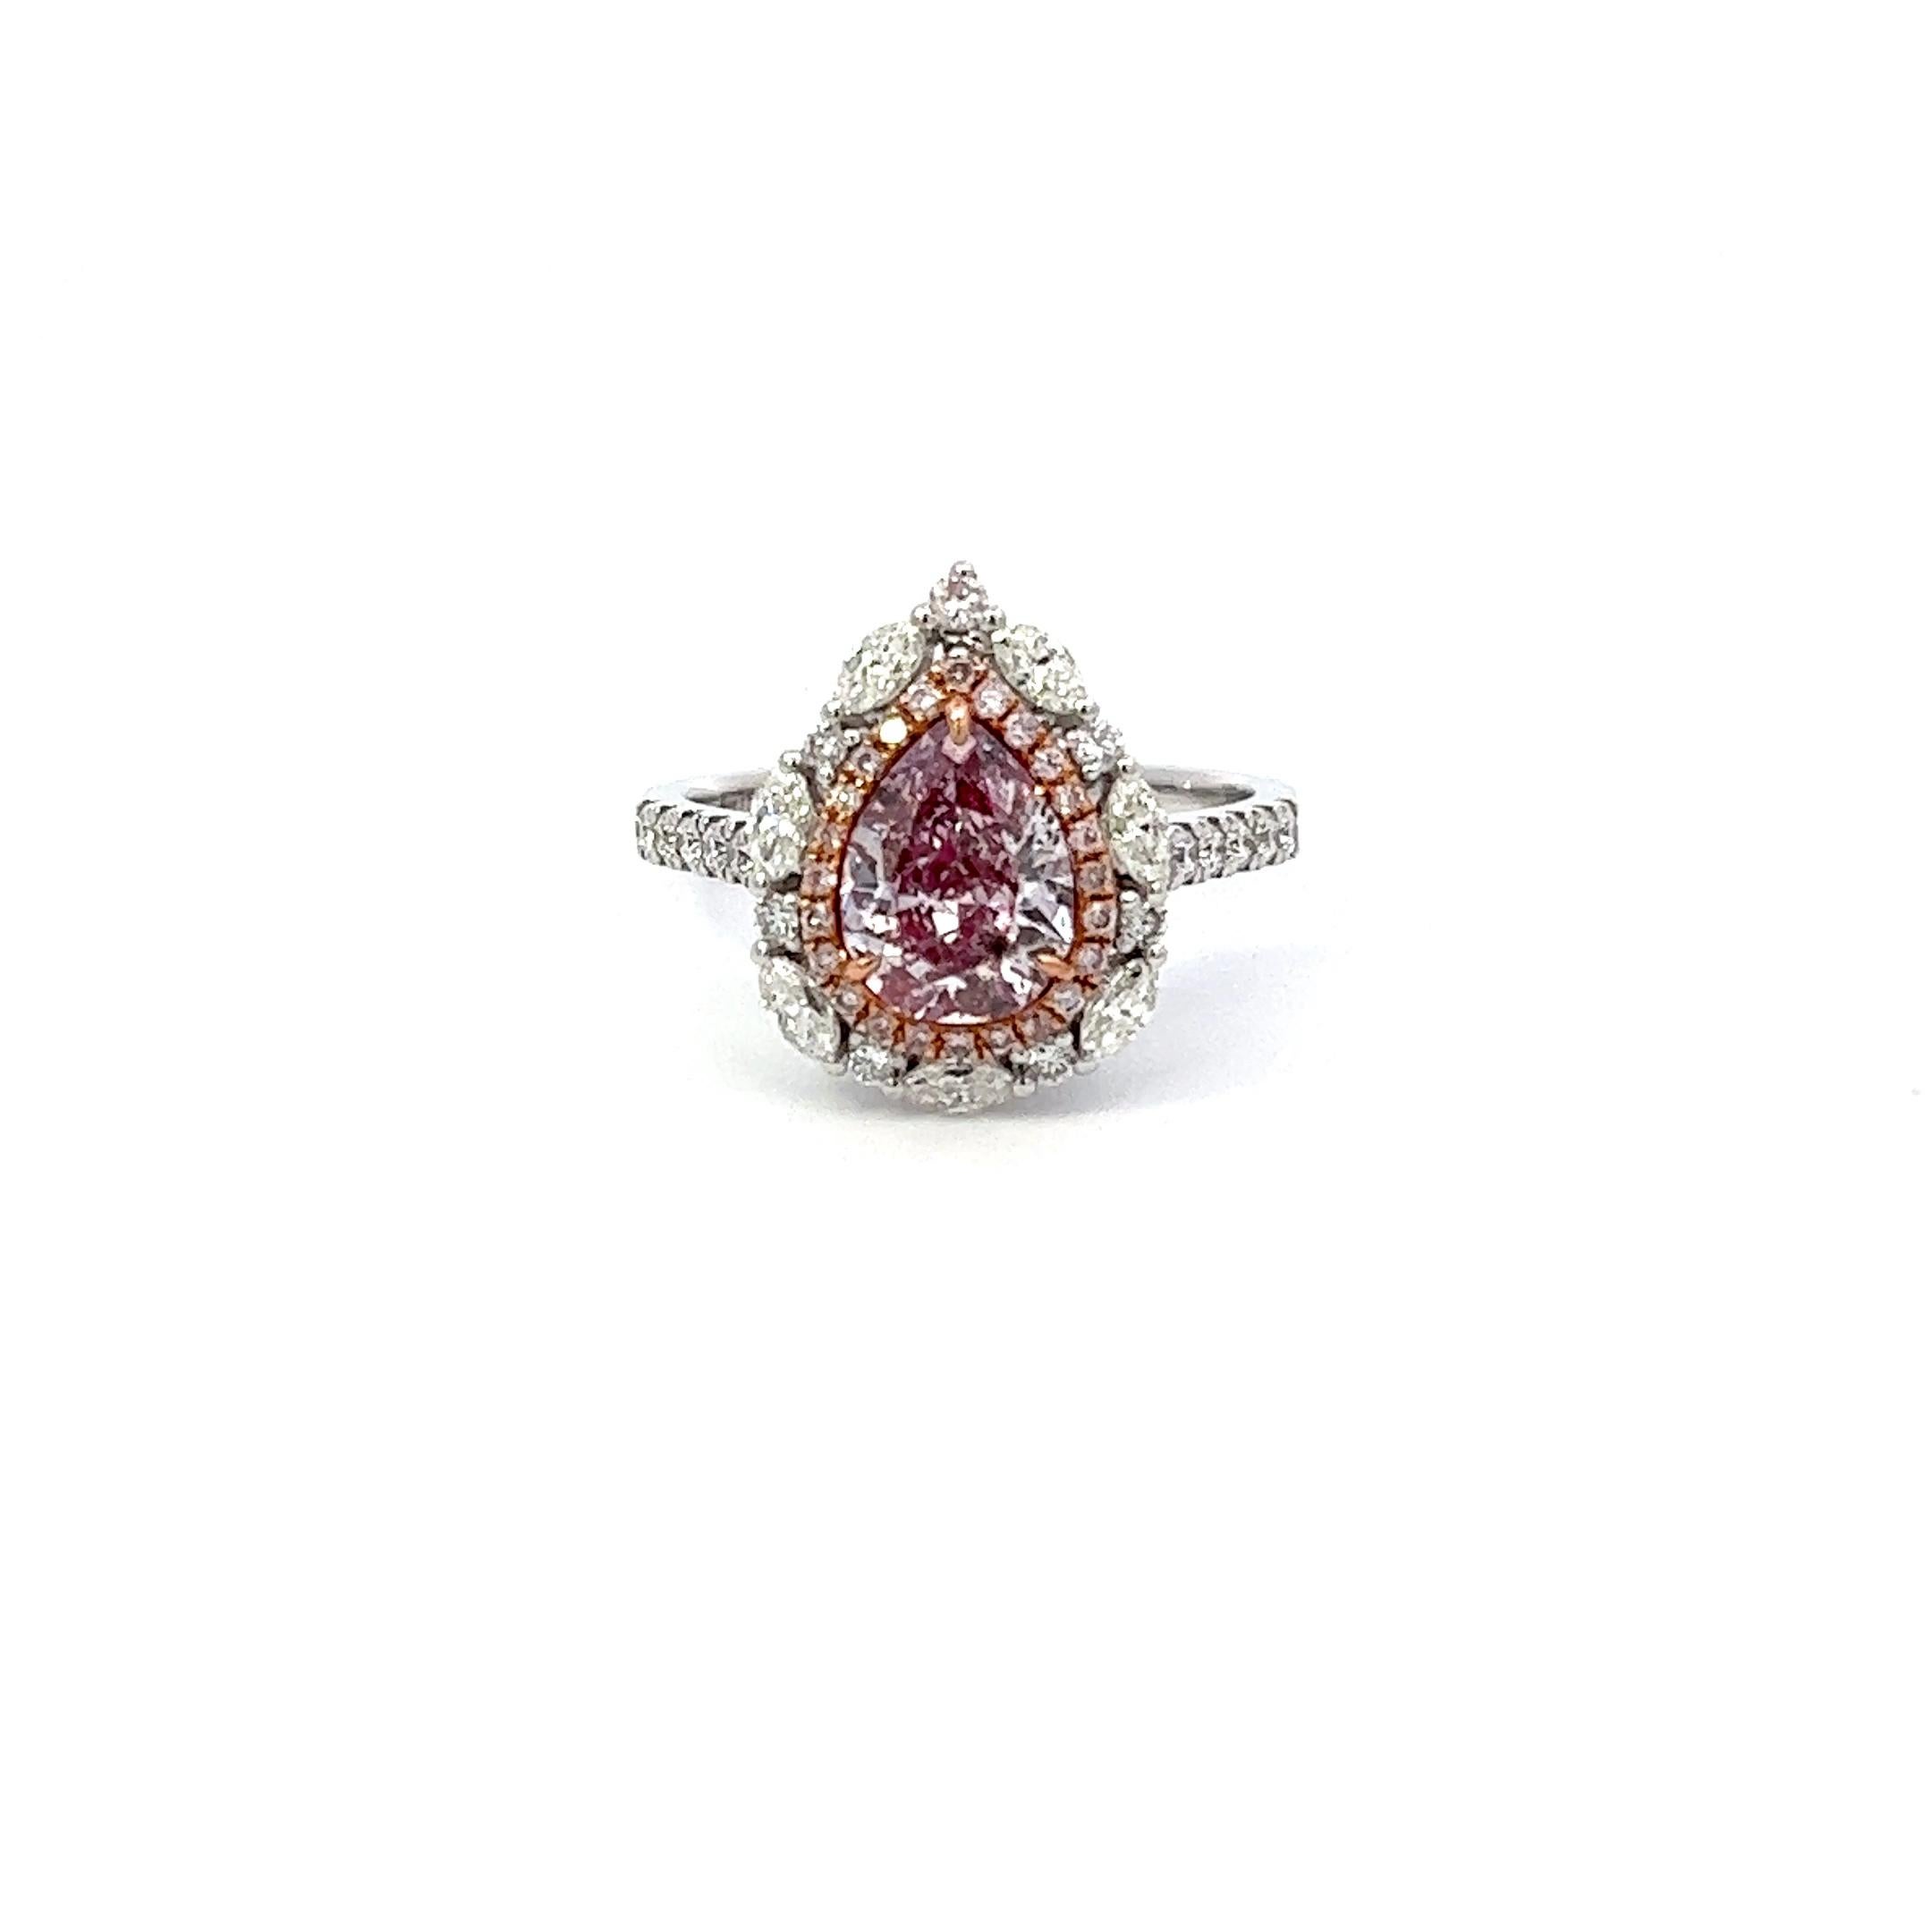 Center: 1.42ct Fancy Light Purplish Pink I2 GIA# 1228525656
Setting: 18k White Gold 0.69ctw Pink and White Diamonds

An extremely rare and stunning natural pink diamond center. Pink Diamonds account for less than 0.01% of all diamonds mined in the